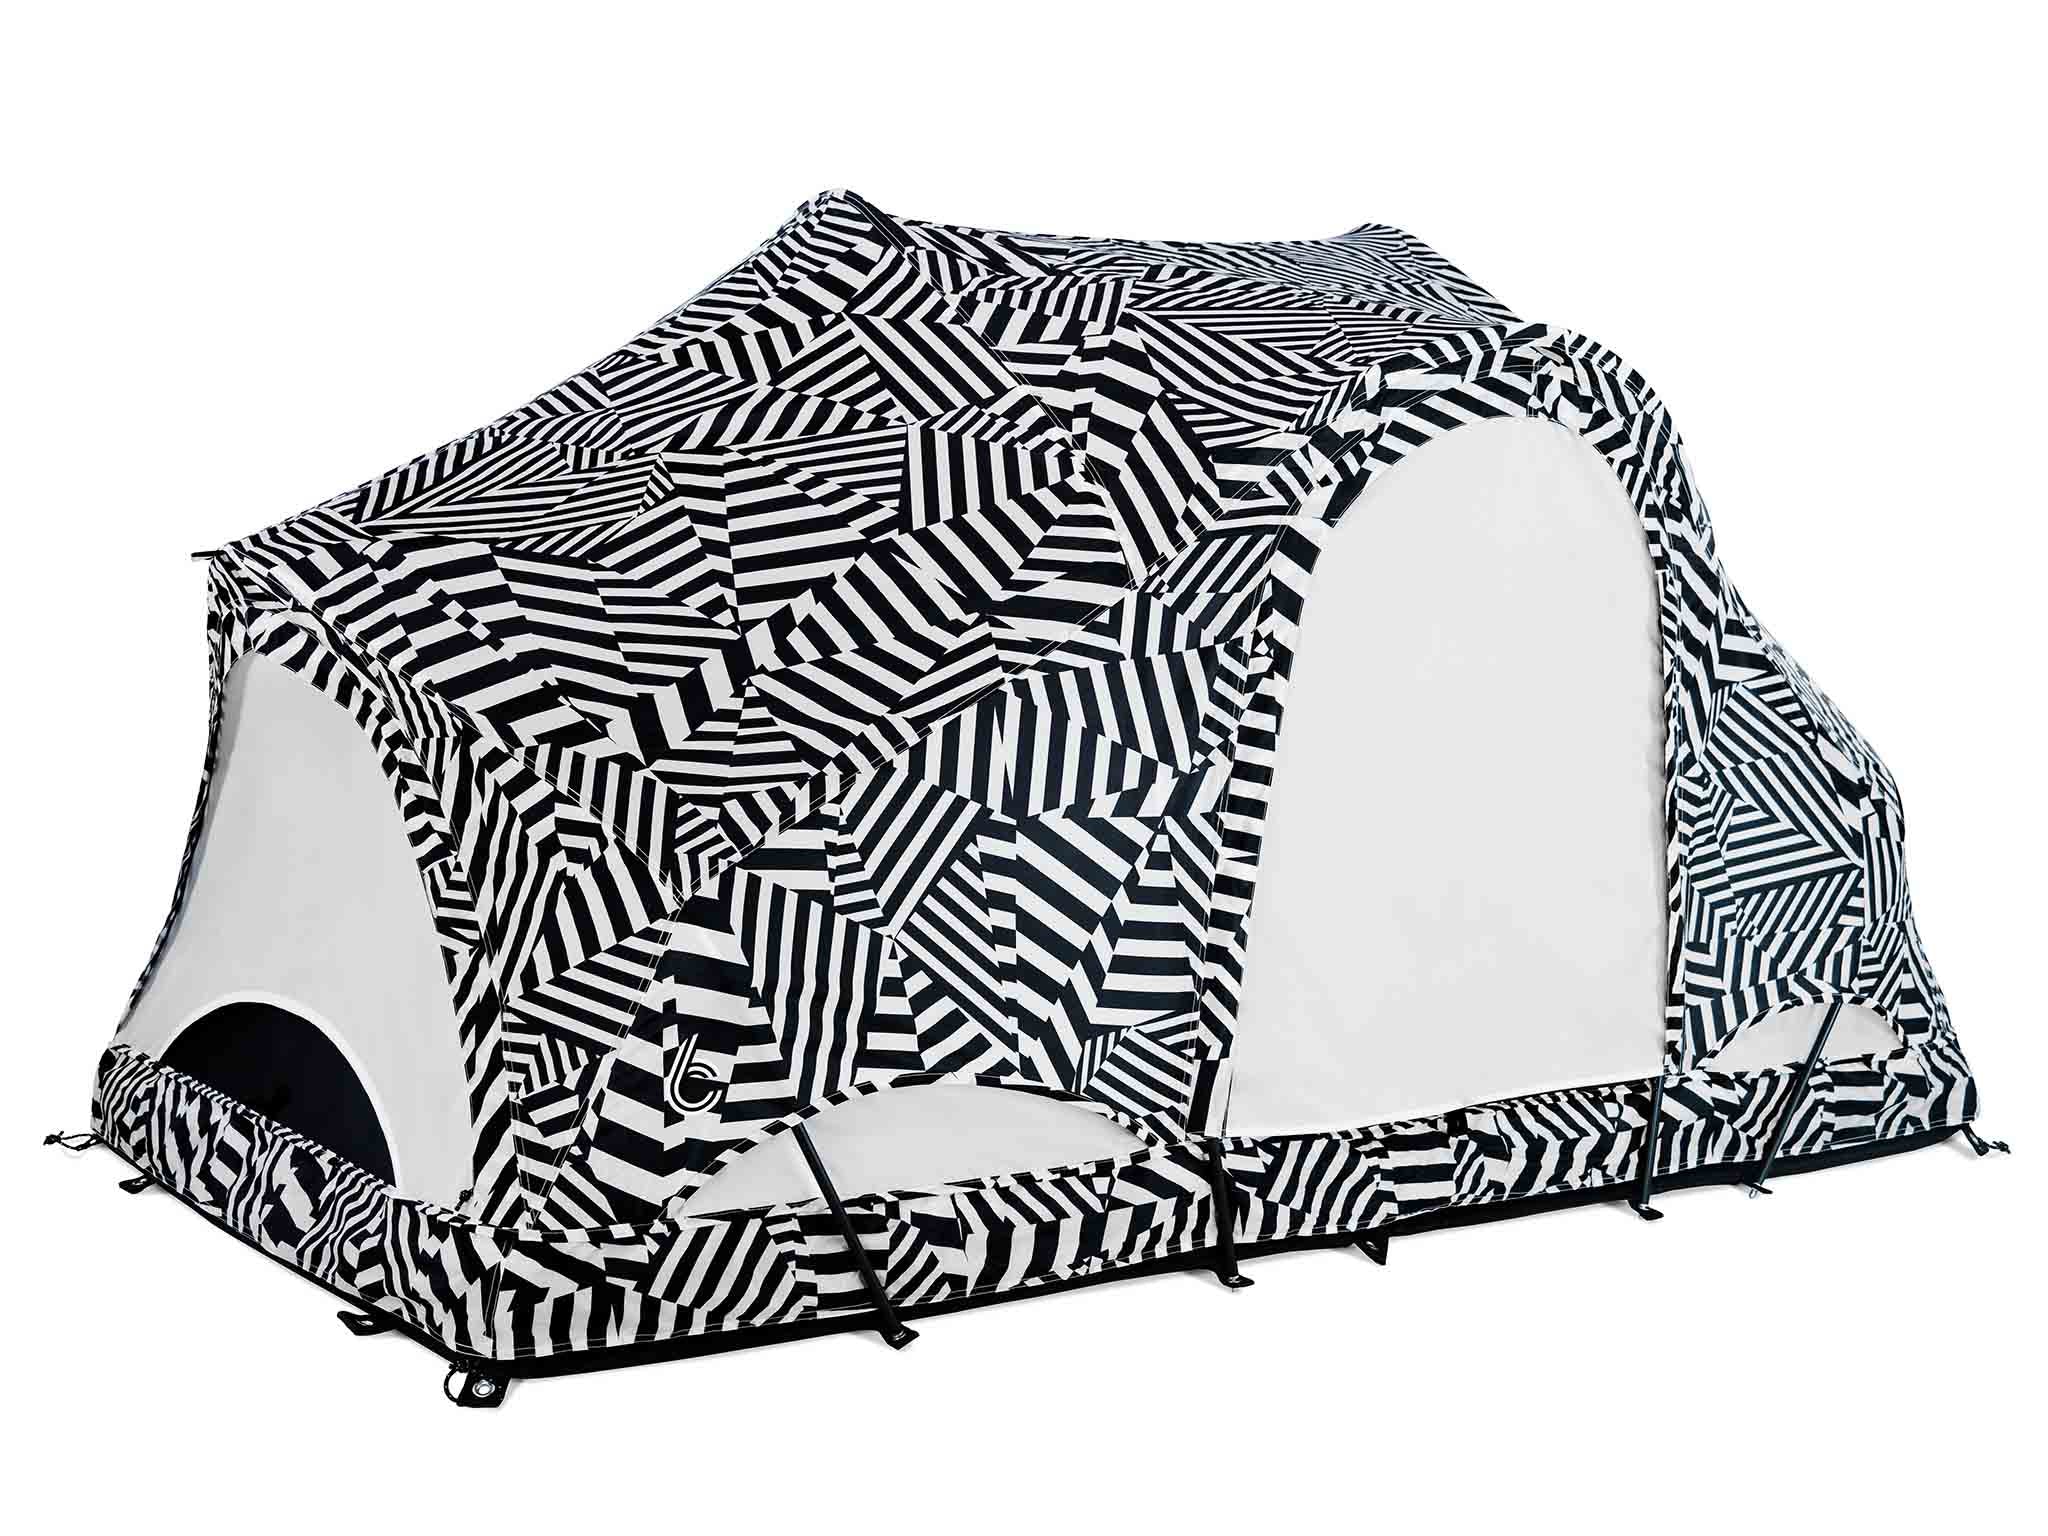 REV TENT roof top tent ground tent pick-up truck tent Dazzle limited Edition by C6 Outdoor